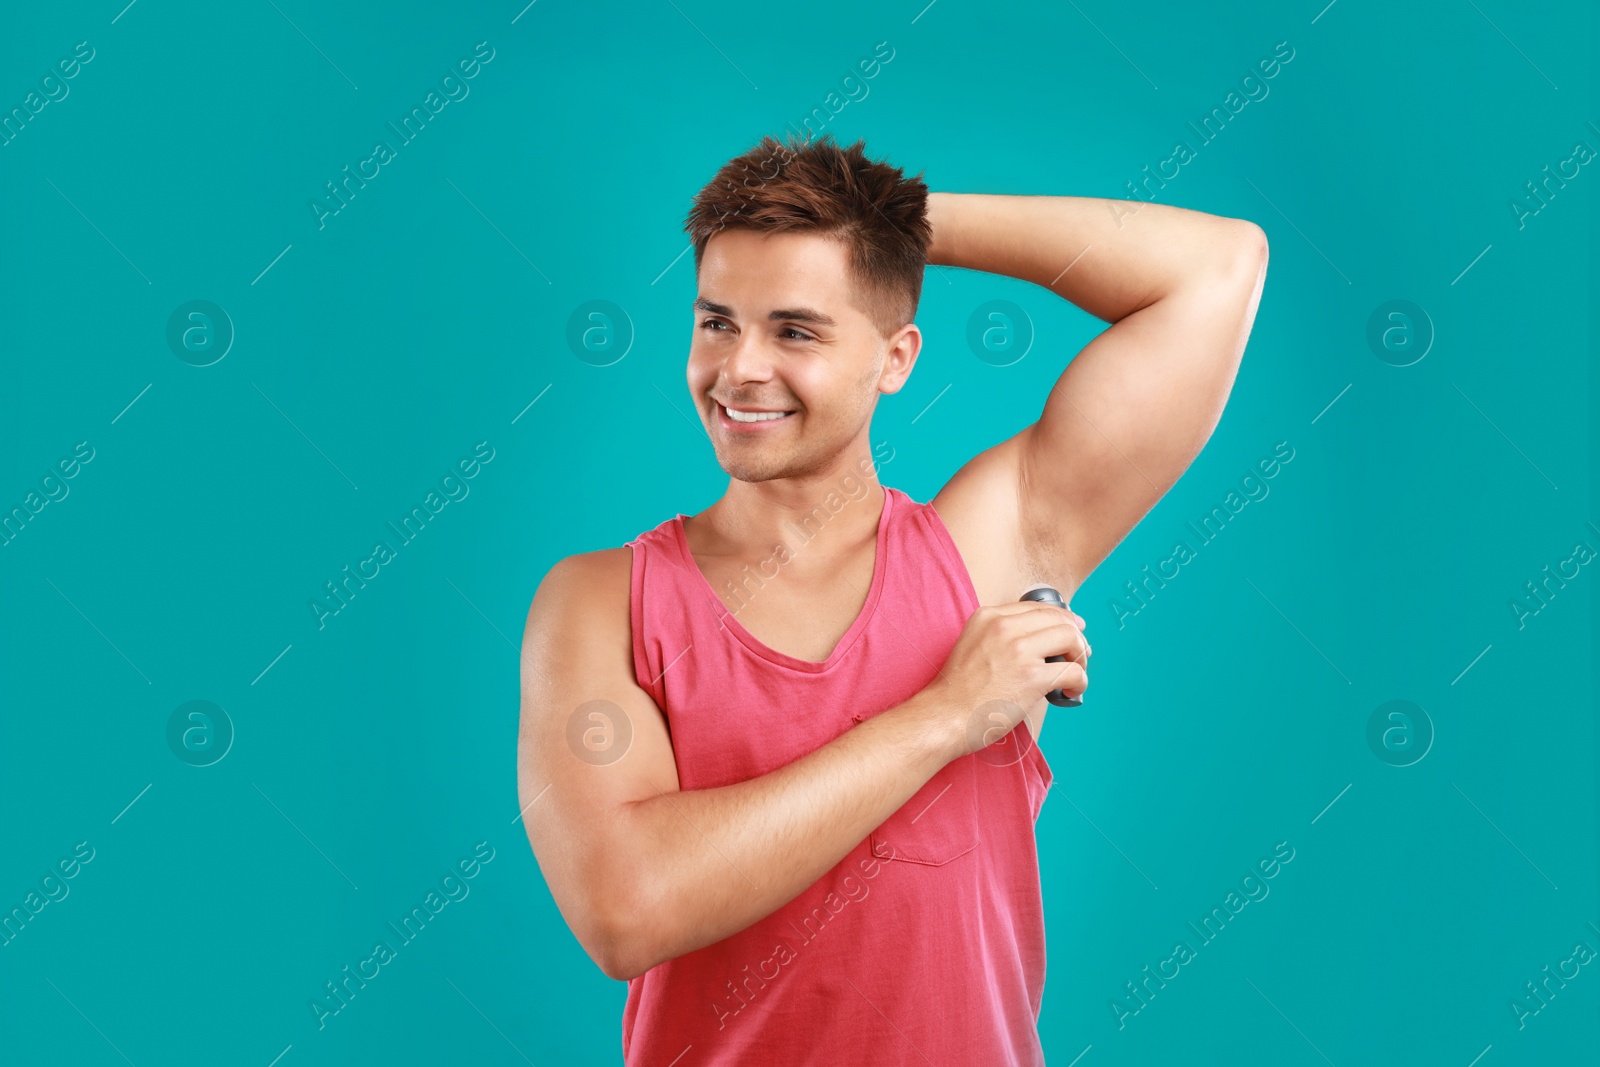 Photo of Young man applying deodorant to armpit on blue background